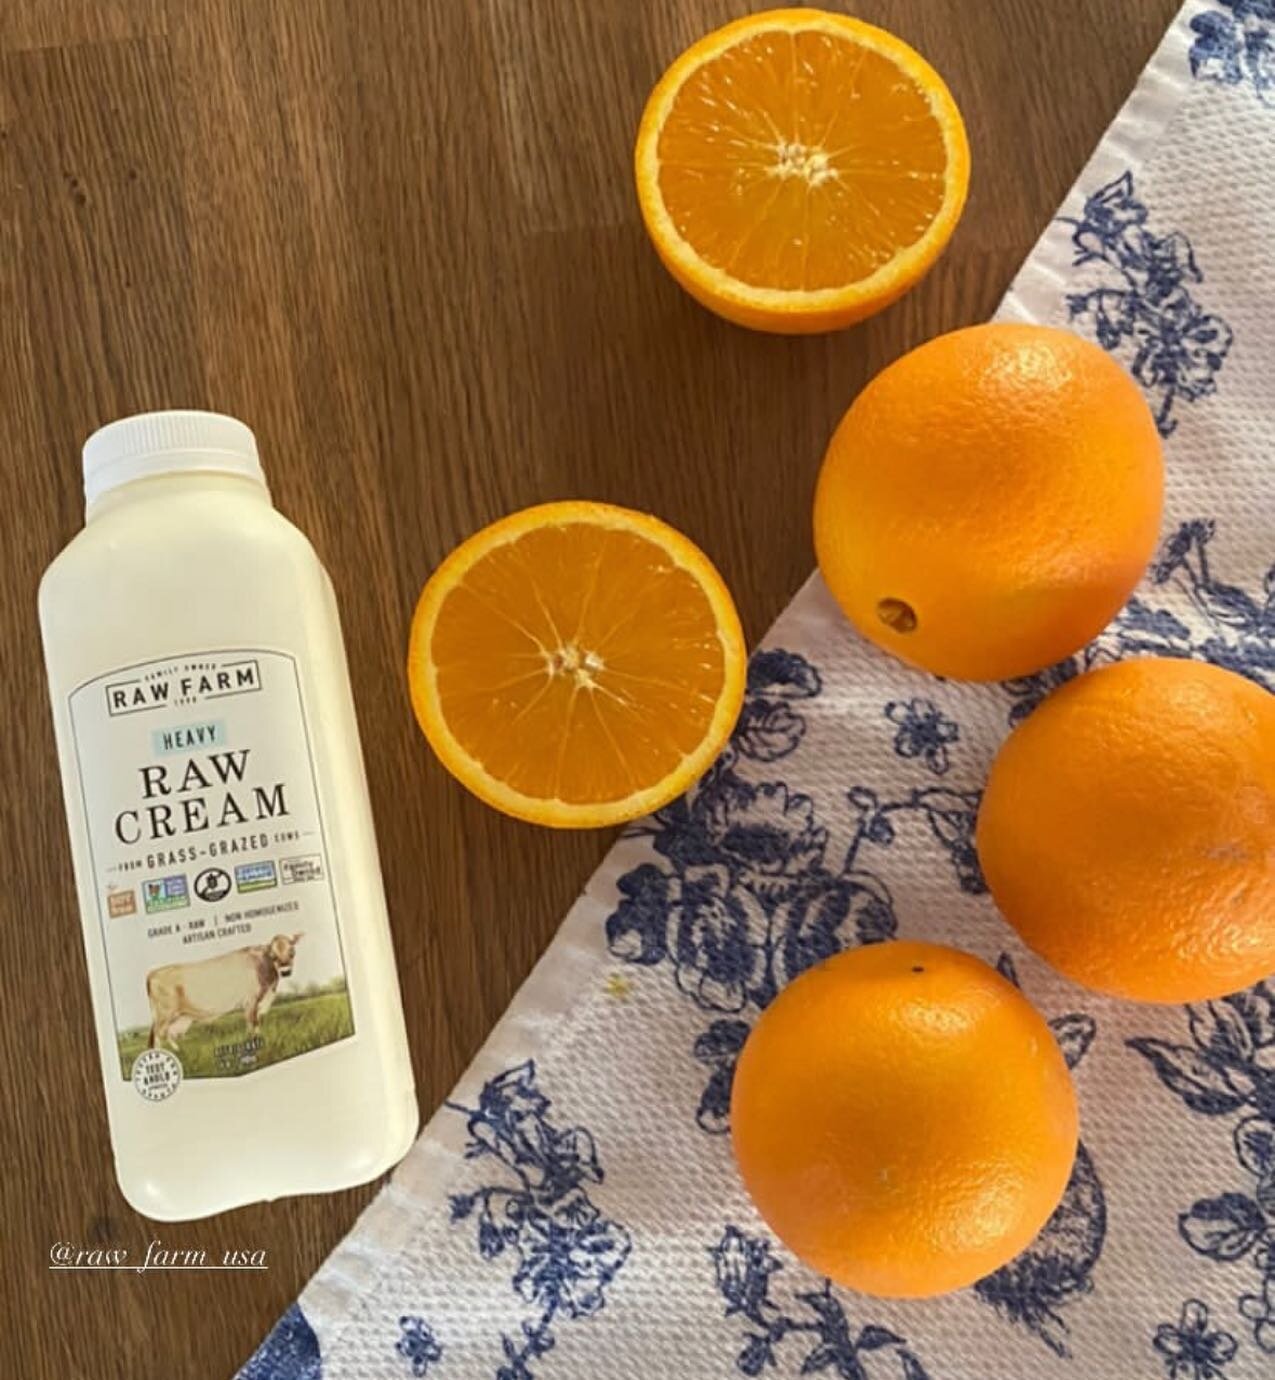 Comment what you would make with RAW CREAM + raw 🍊 oranges 📸 photo: @thecasamagana #rawgoodness #rawpetfood #recipe #healthylifestyle #healthyrecipes #rawdiet #animalbased